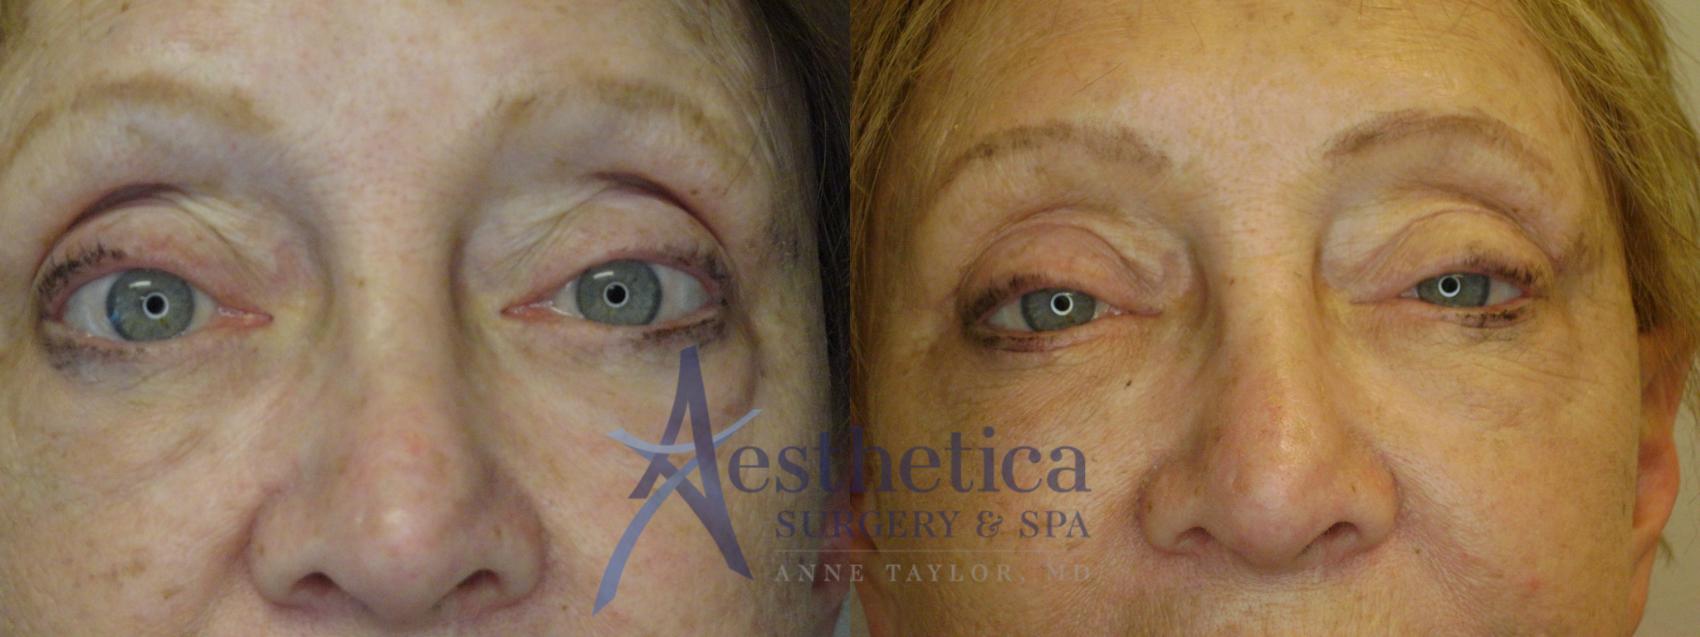 Blepharoplasty (Eyelid Surgery) Case 781 Before & After Front | Columbus, OH | Aesthetica Surgery & Spa